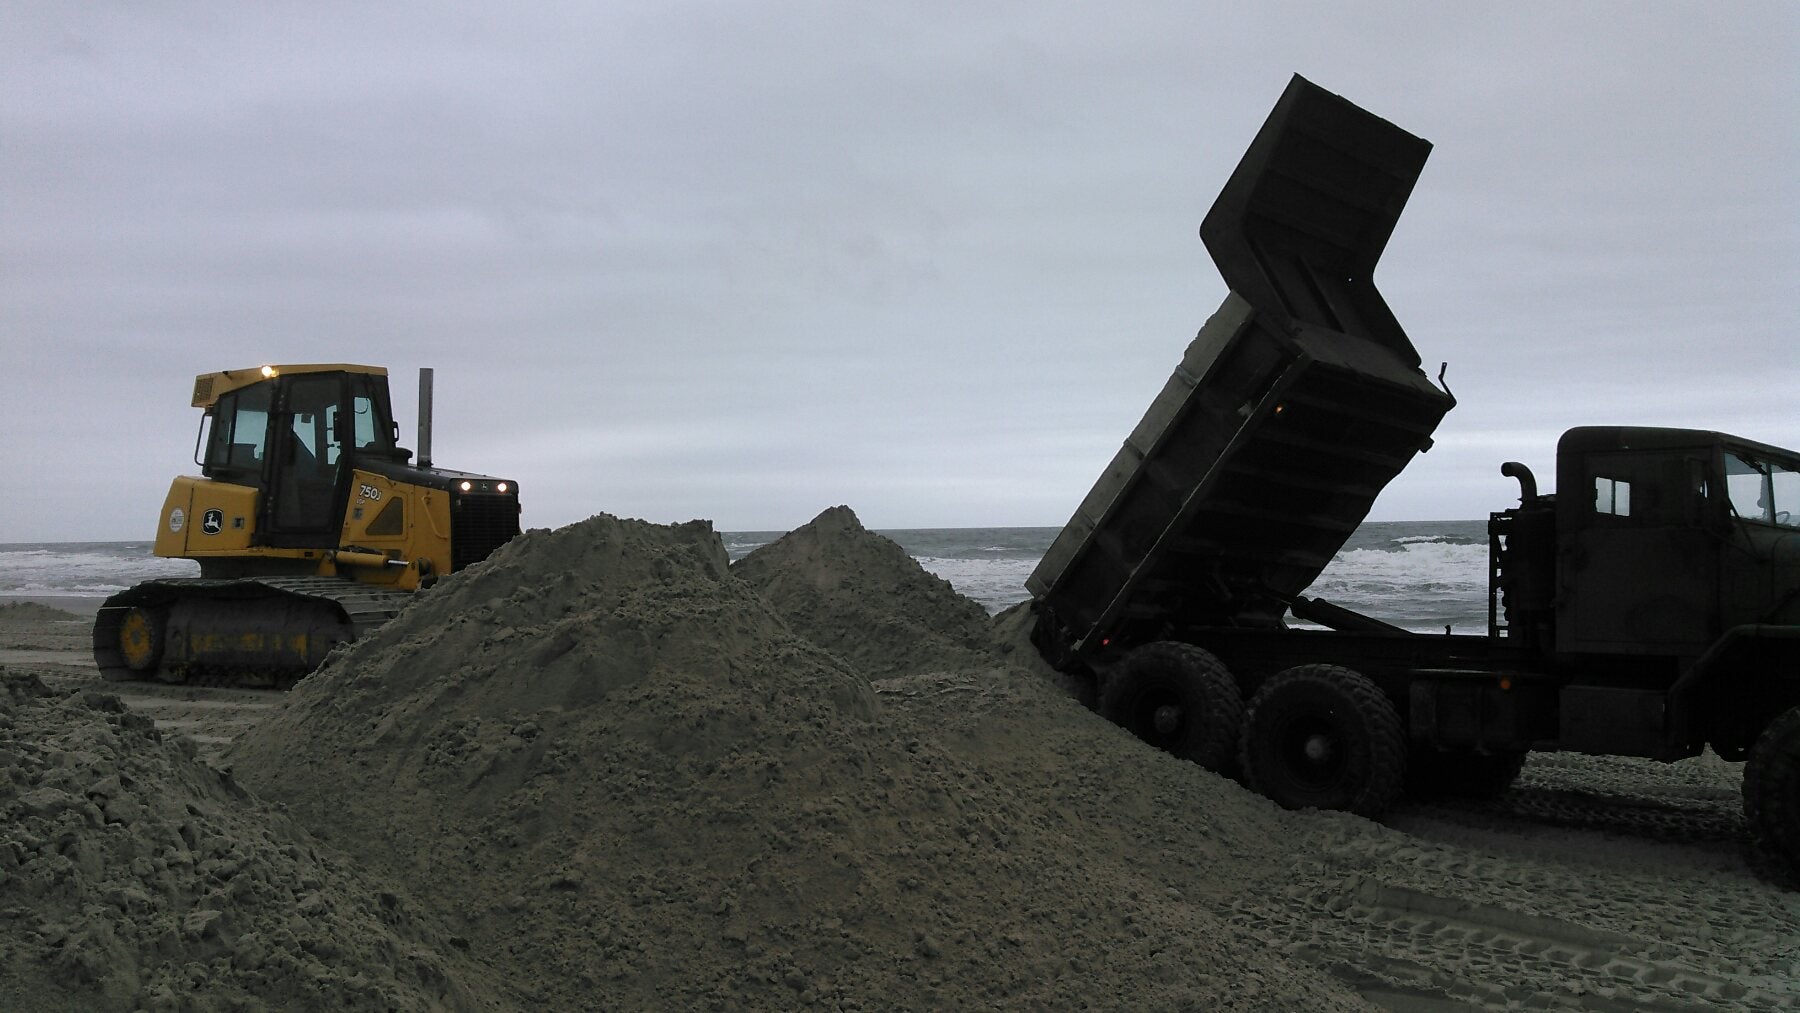 Avalon workers move sand on the beach. (Scott Wahl)